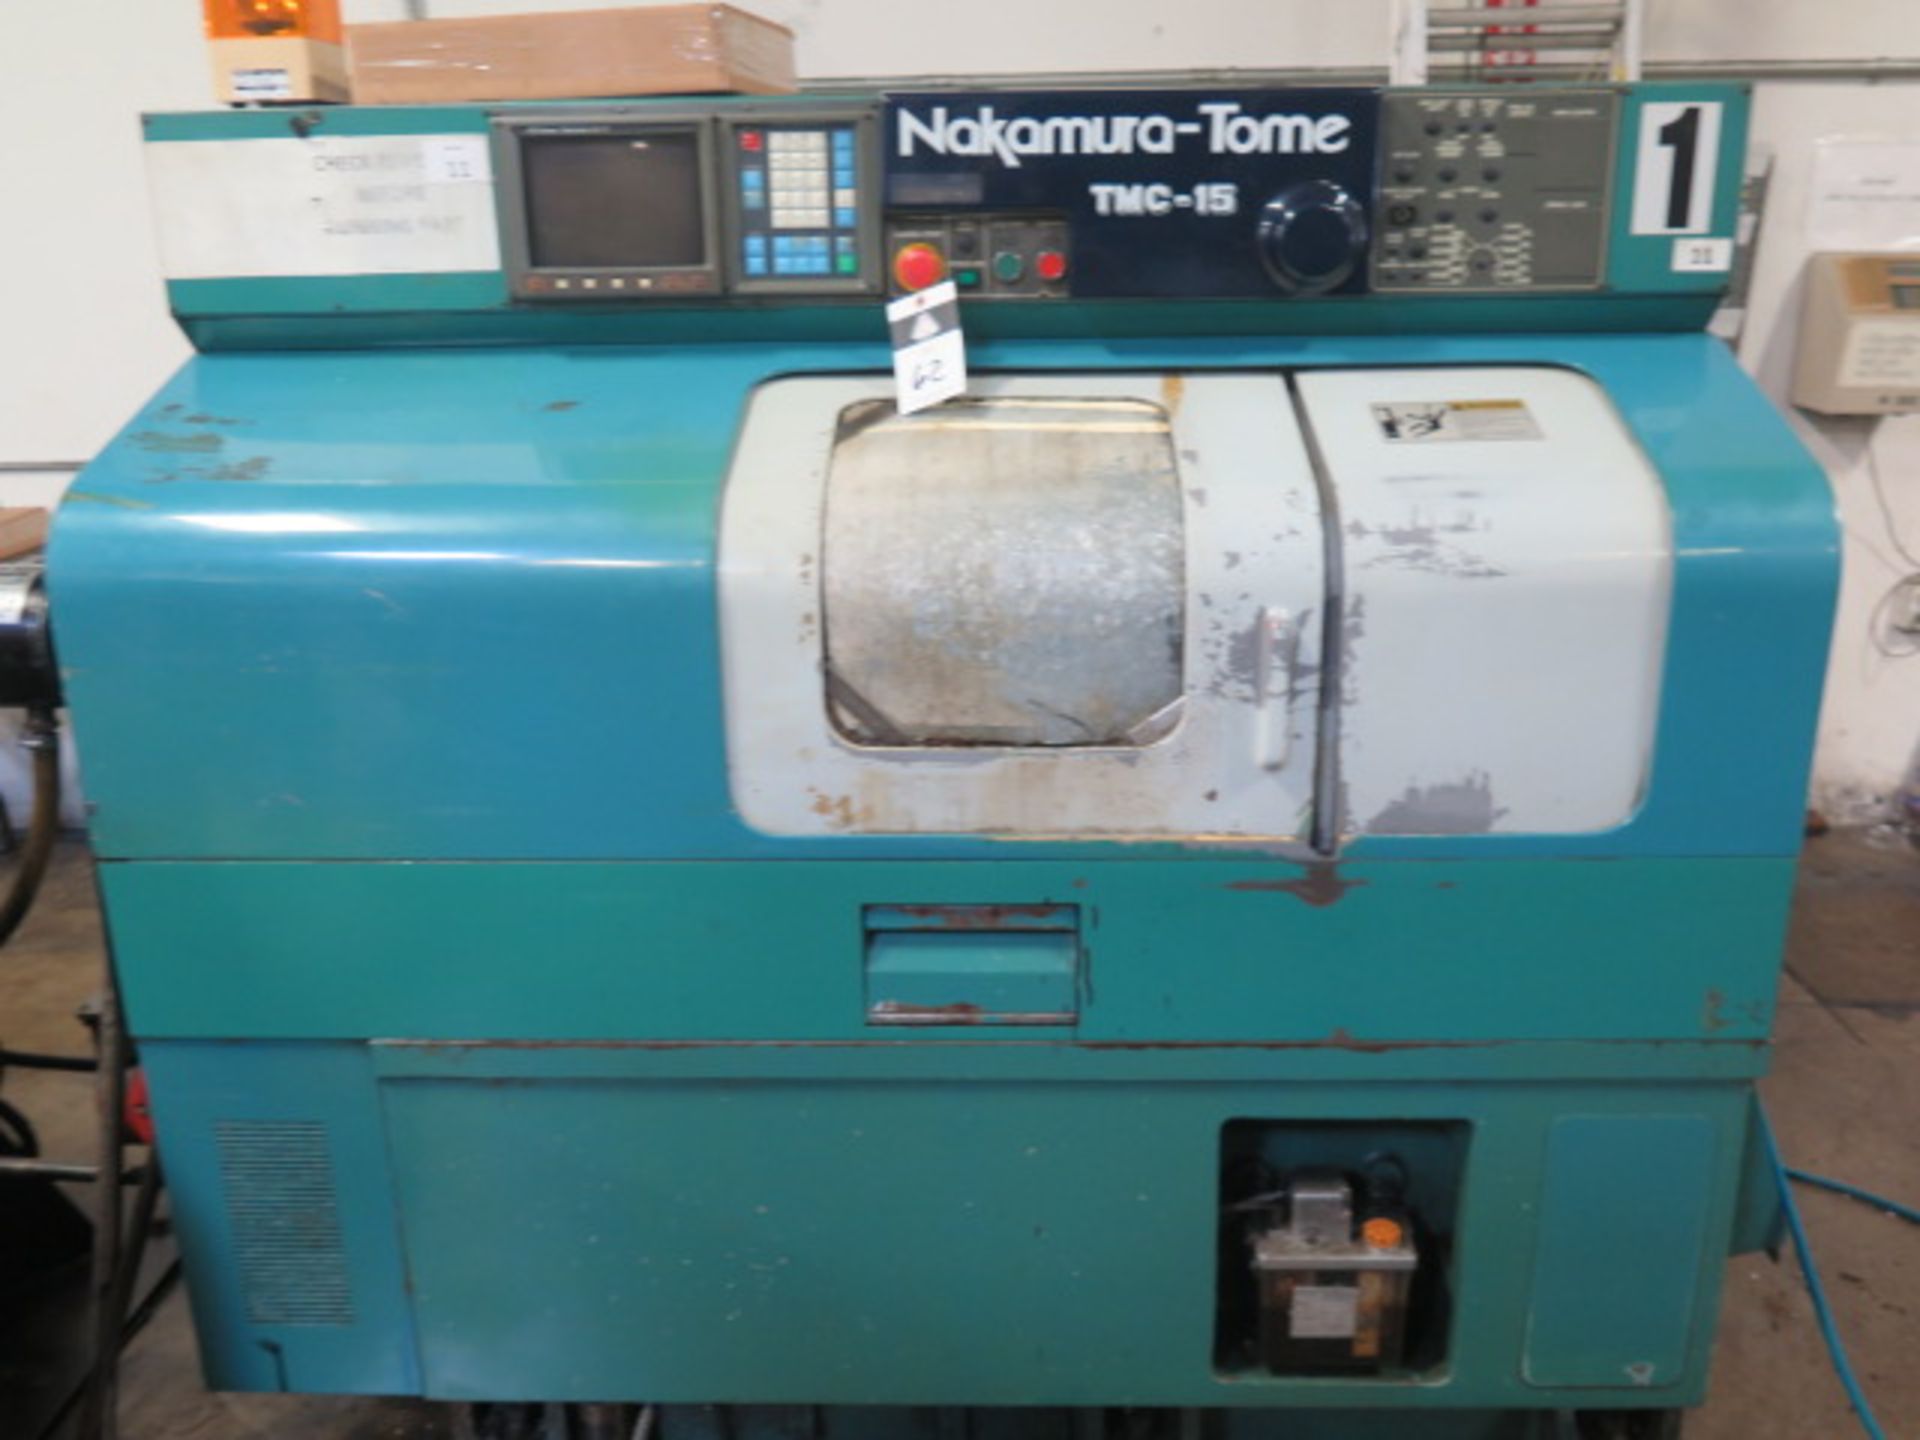 Nakamura Tome TMC-15 CNC Turning Center s/n E04101 w/ Fanuc Series 0-T Controls, SOLD AS IS